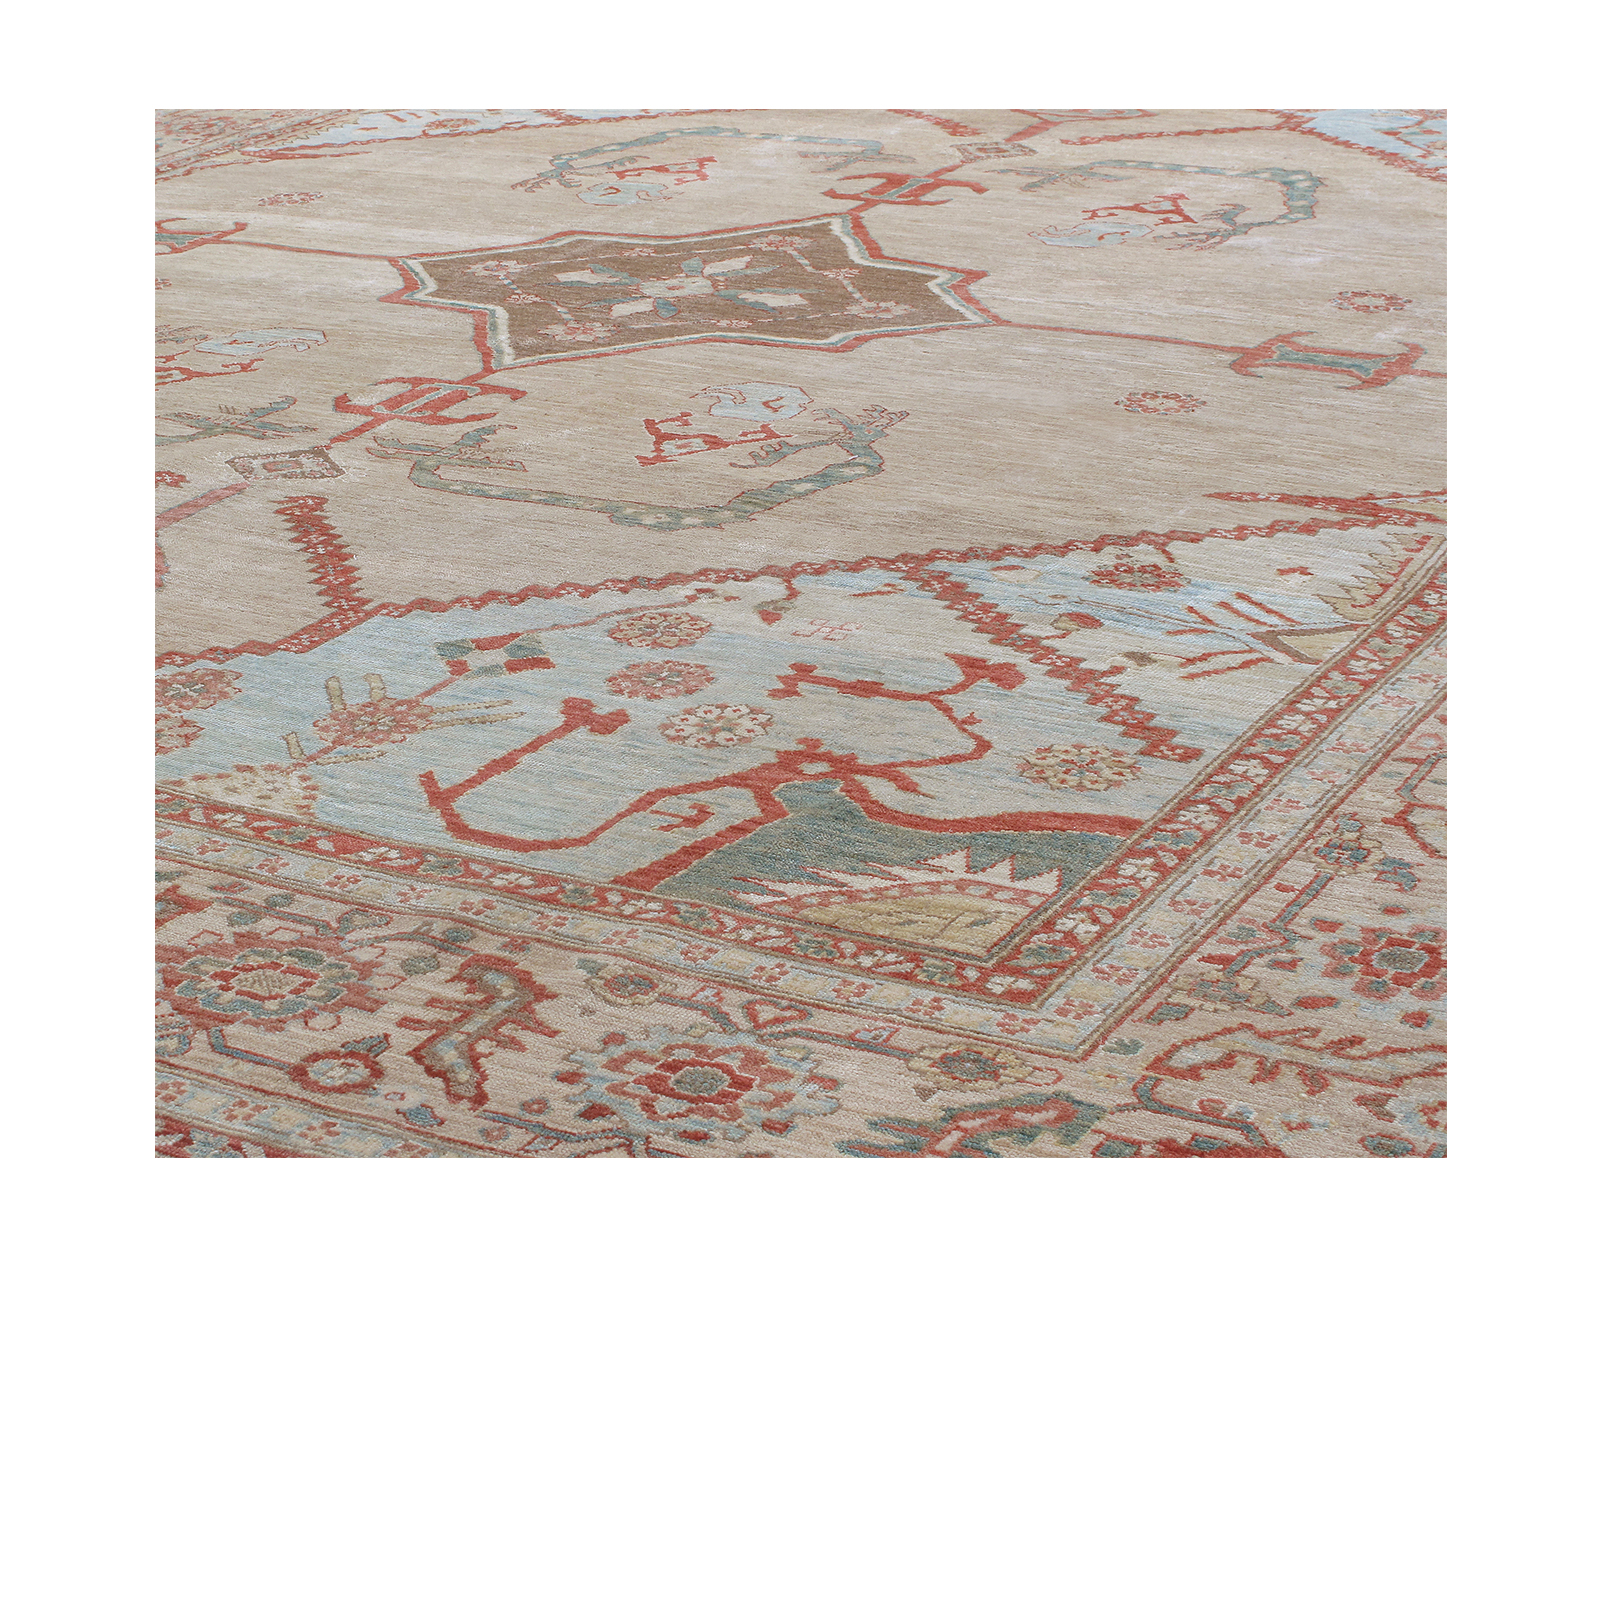 This Persian Bakshaish rug is hand-knotted and made of vegetable dye.